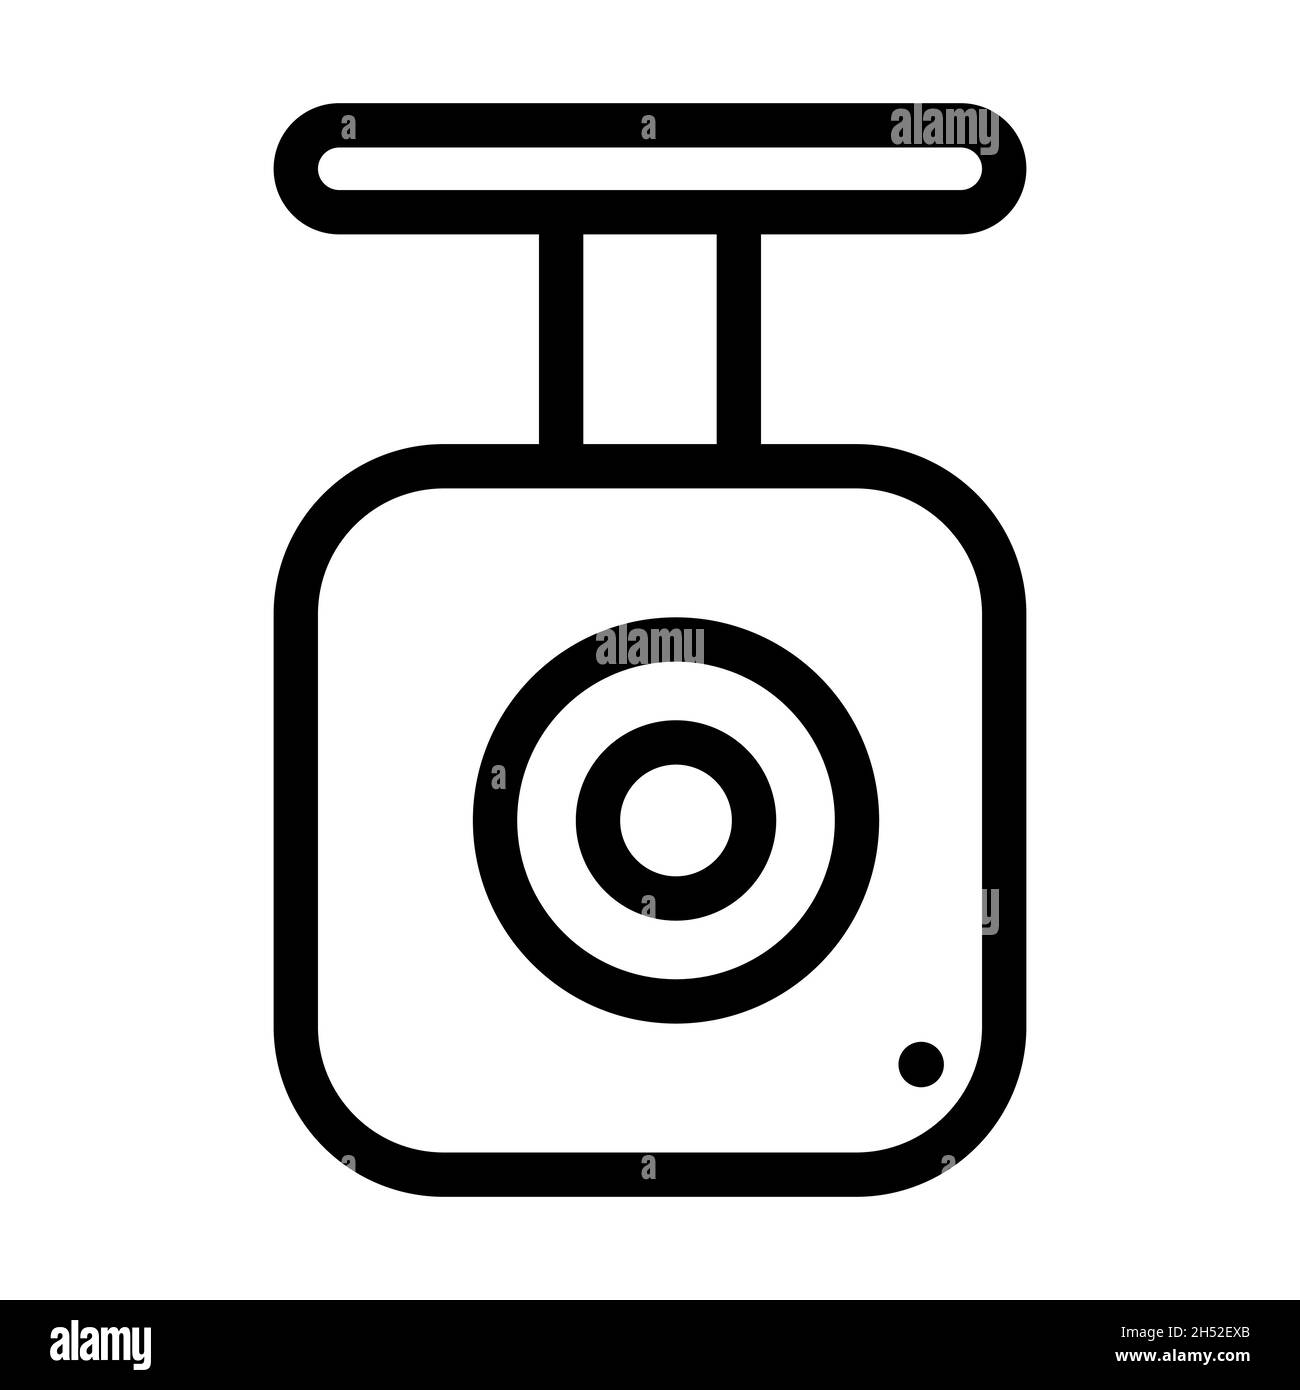 Car DVR icon, dashboard camera dashcam, for video recording of important events stock illustration Stock Vector